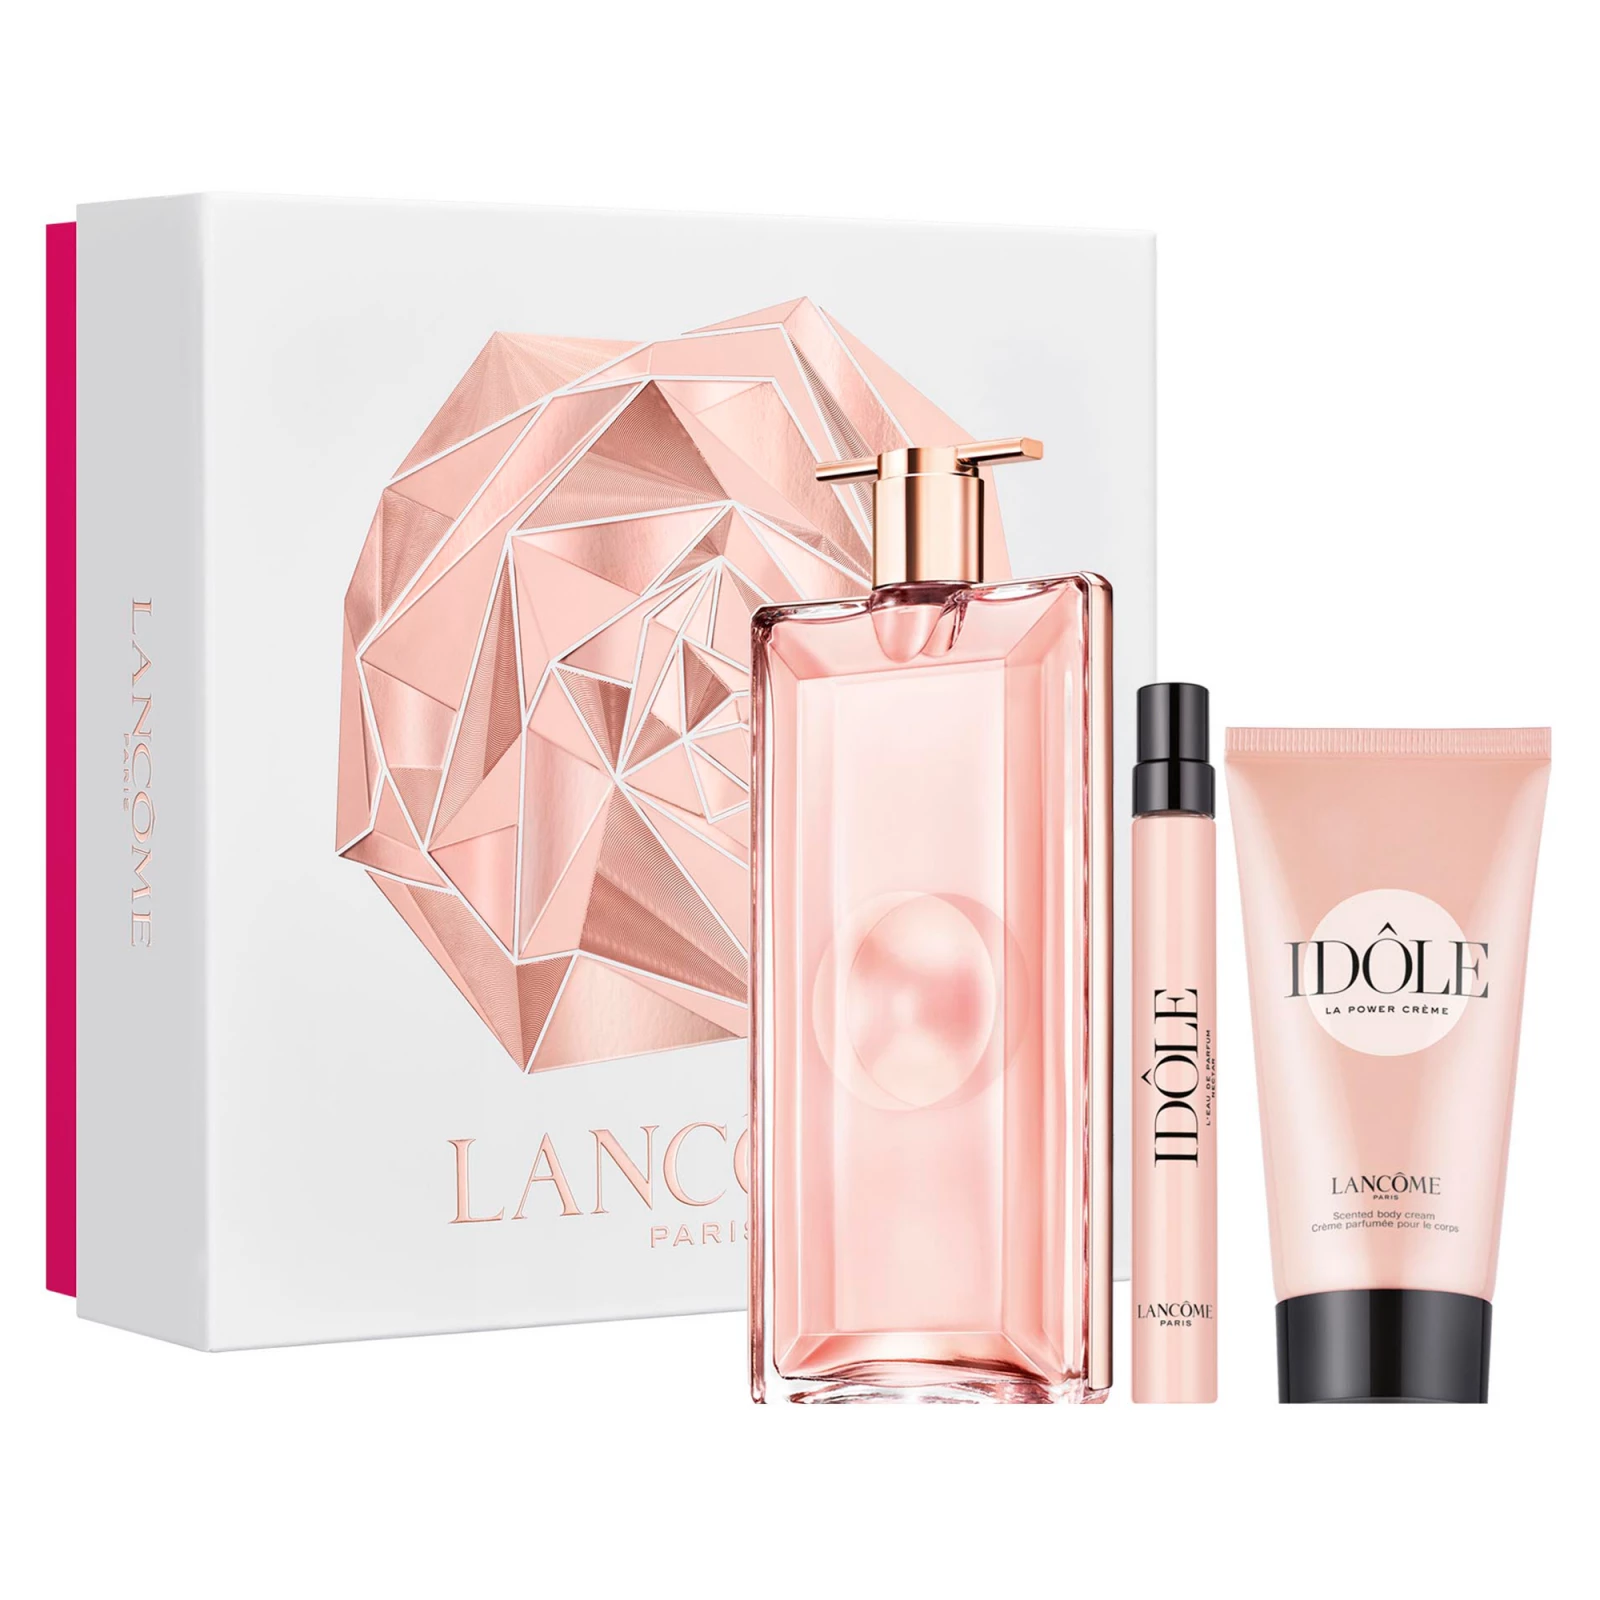 https://muoimuoi.vn/static/9745/2022/12/01/Lancome-Fragrance-Idole-Limited-Edition-Holiday-2022-50ml-Set-3614273882354-main.jpg